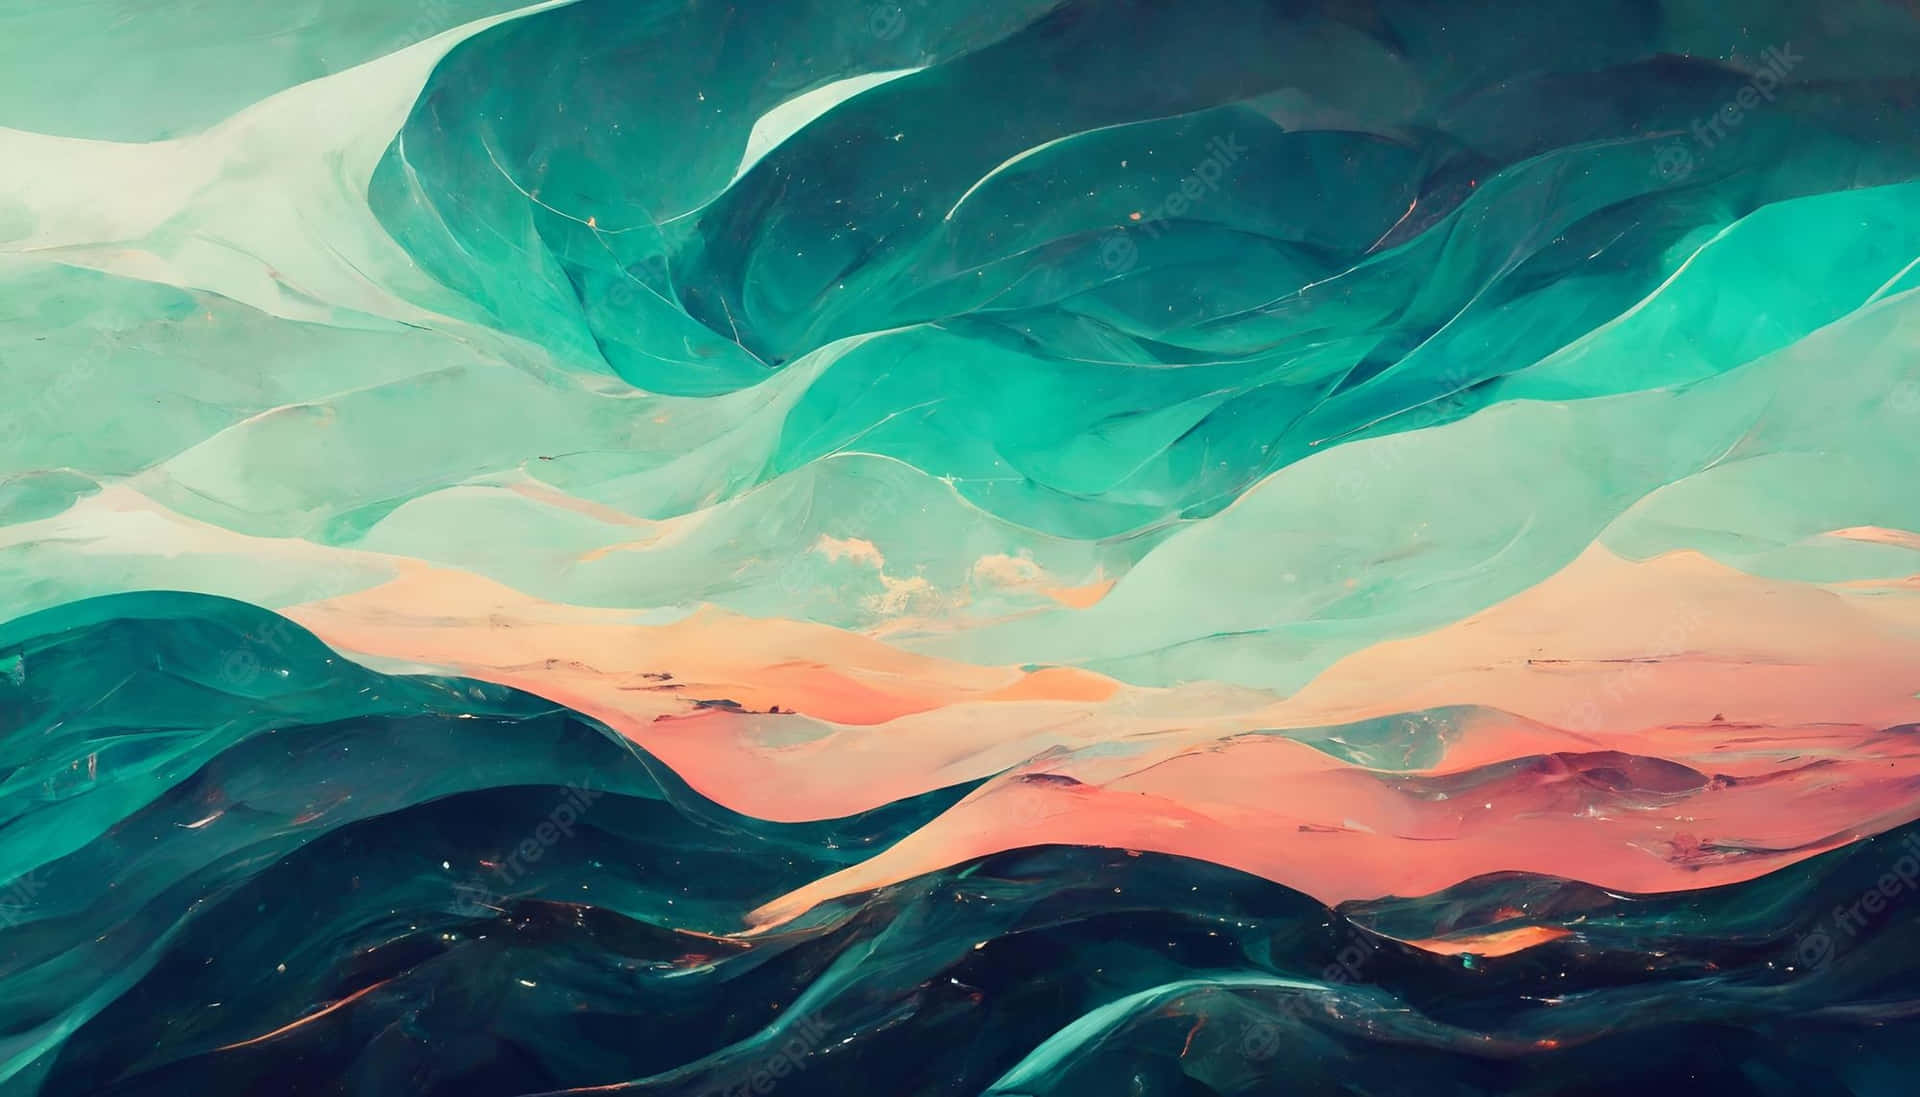 A Painting Of A Mountain With Waves And Clouds Wallpaper